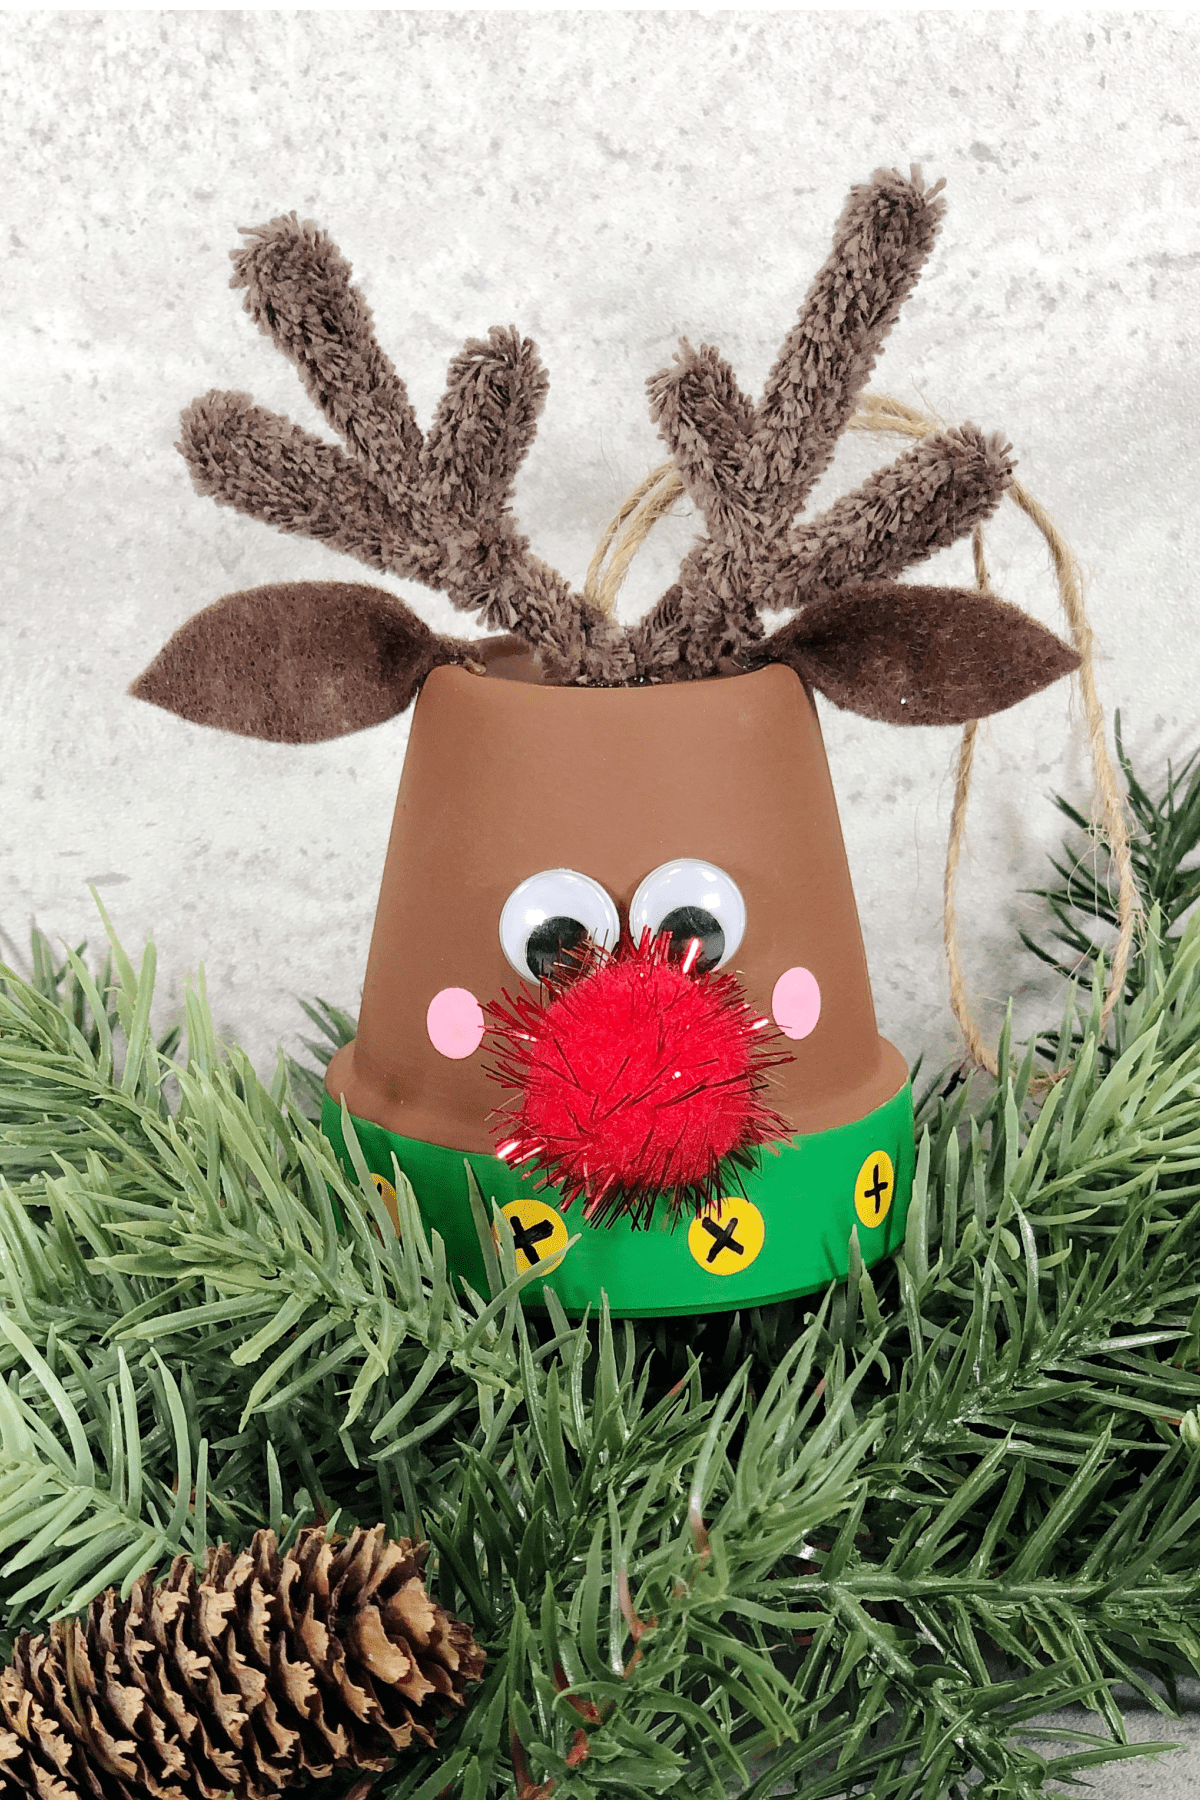 Clay pot reindeer ornament on pin branch